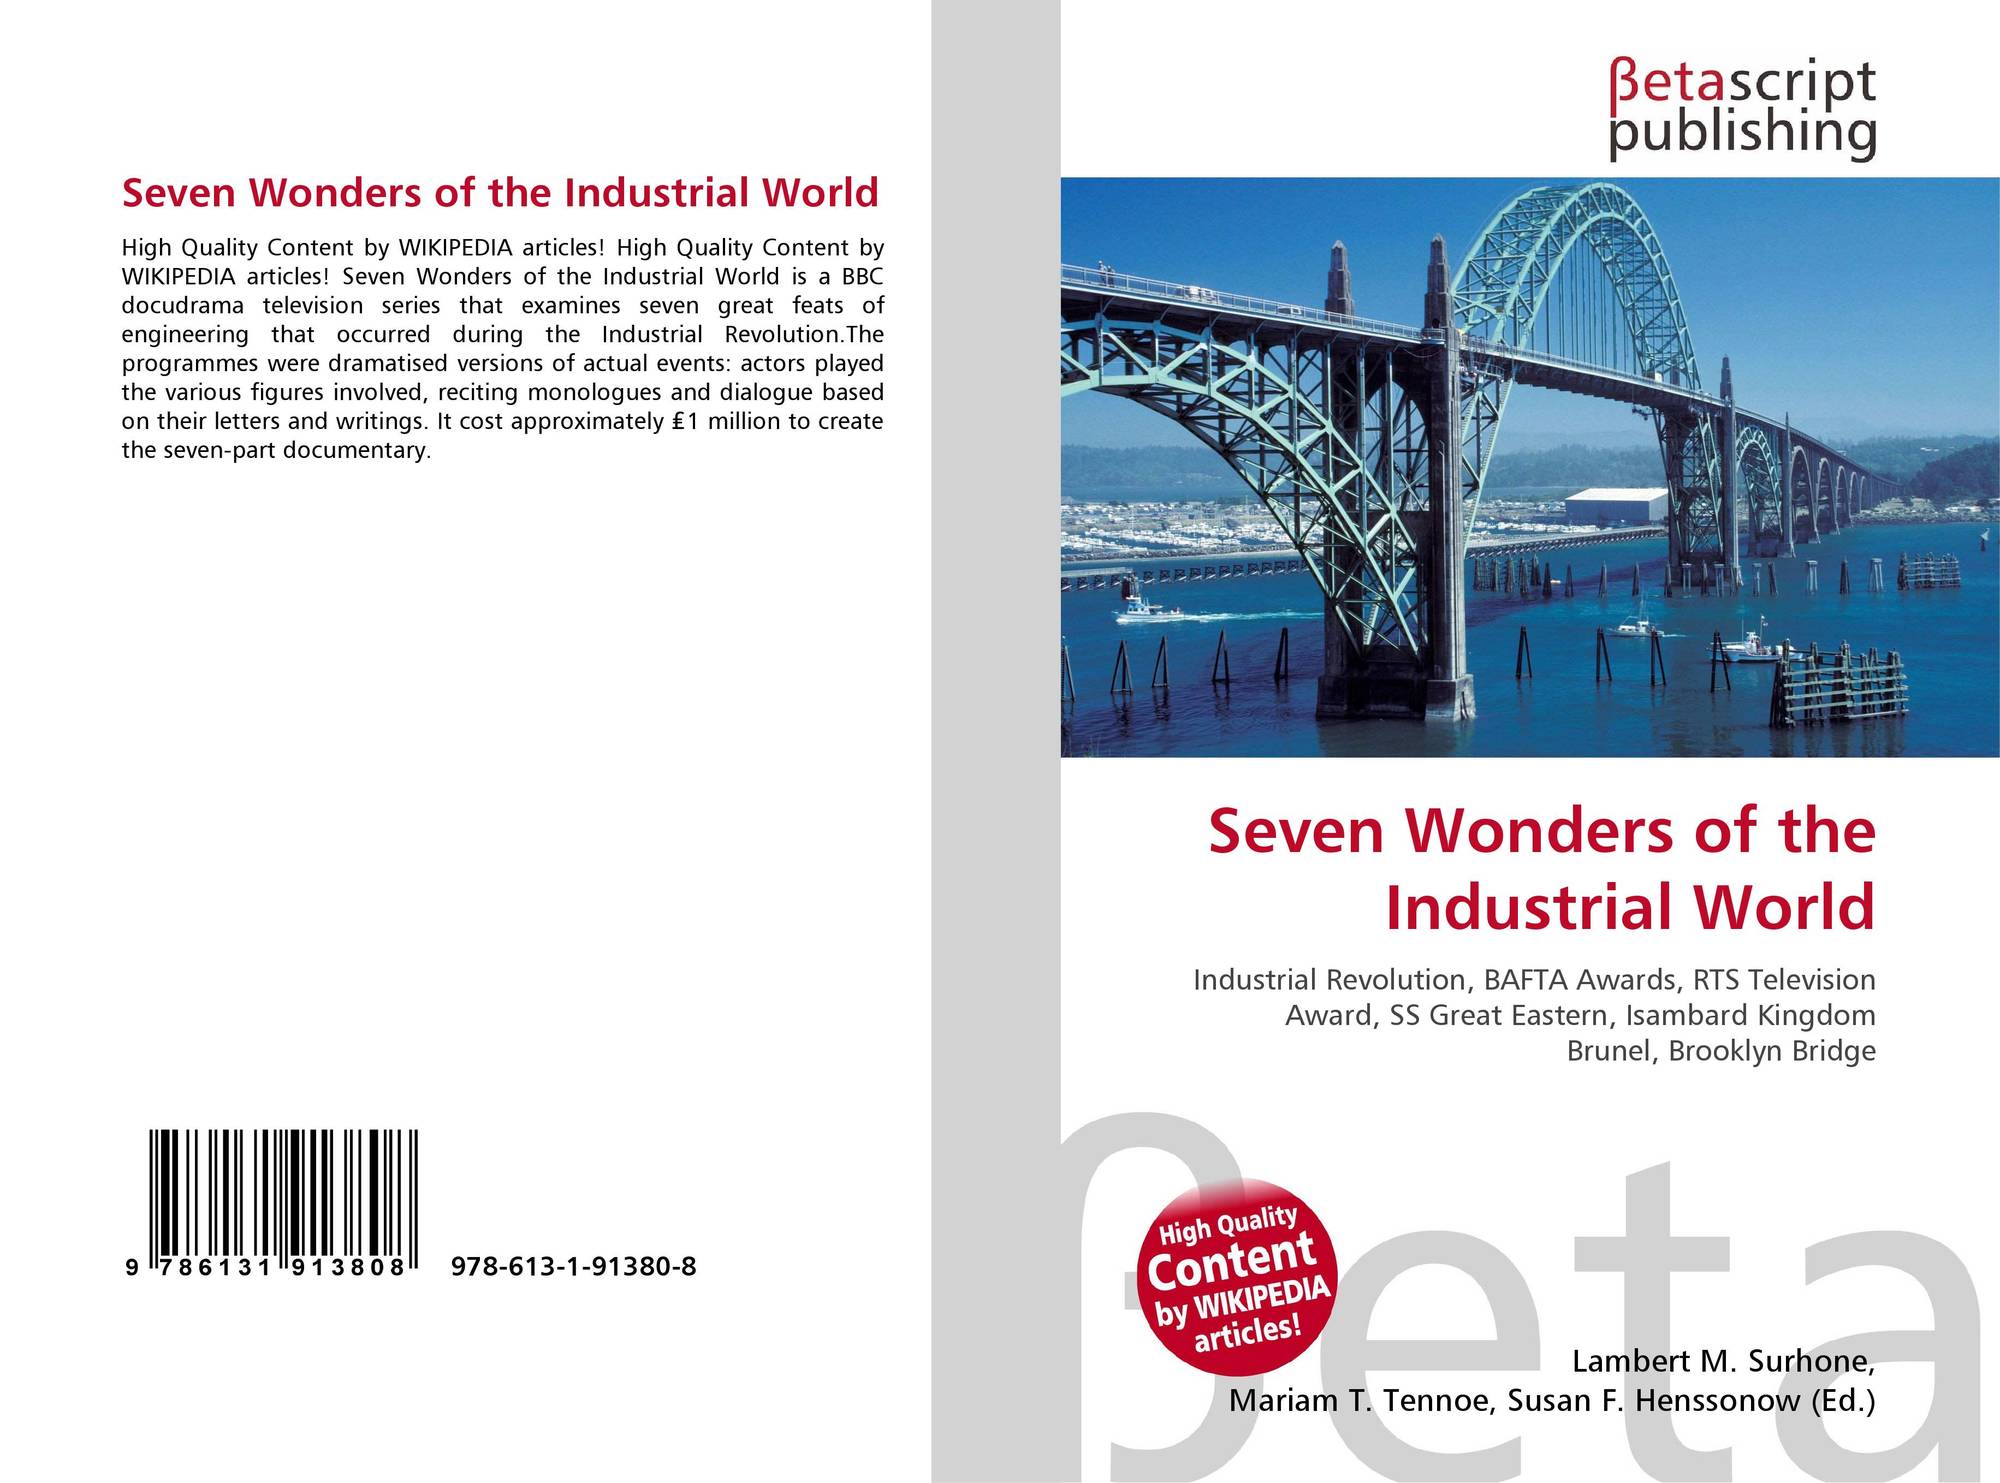 Seven Wonders of the Industrial World - Wikipedia